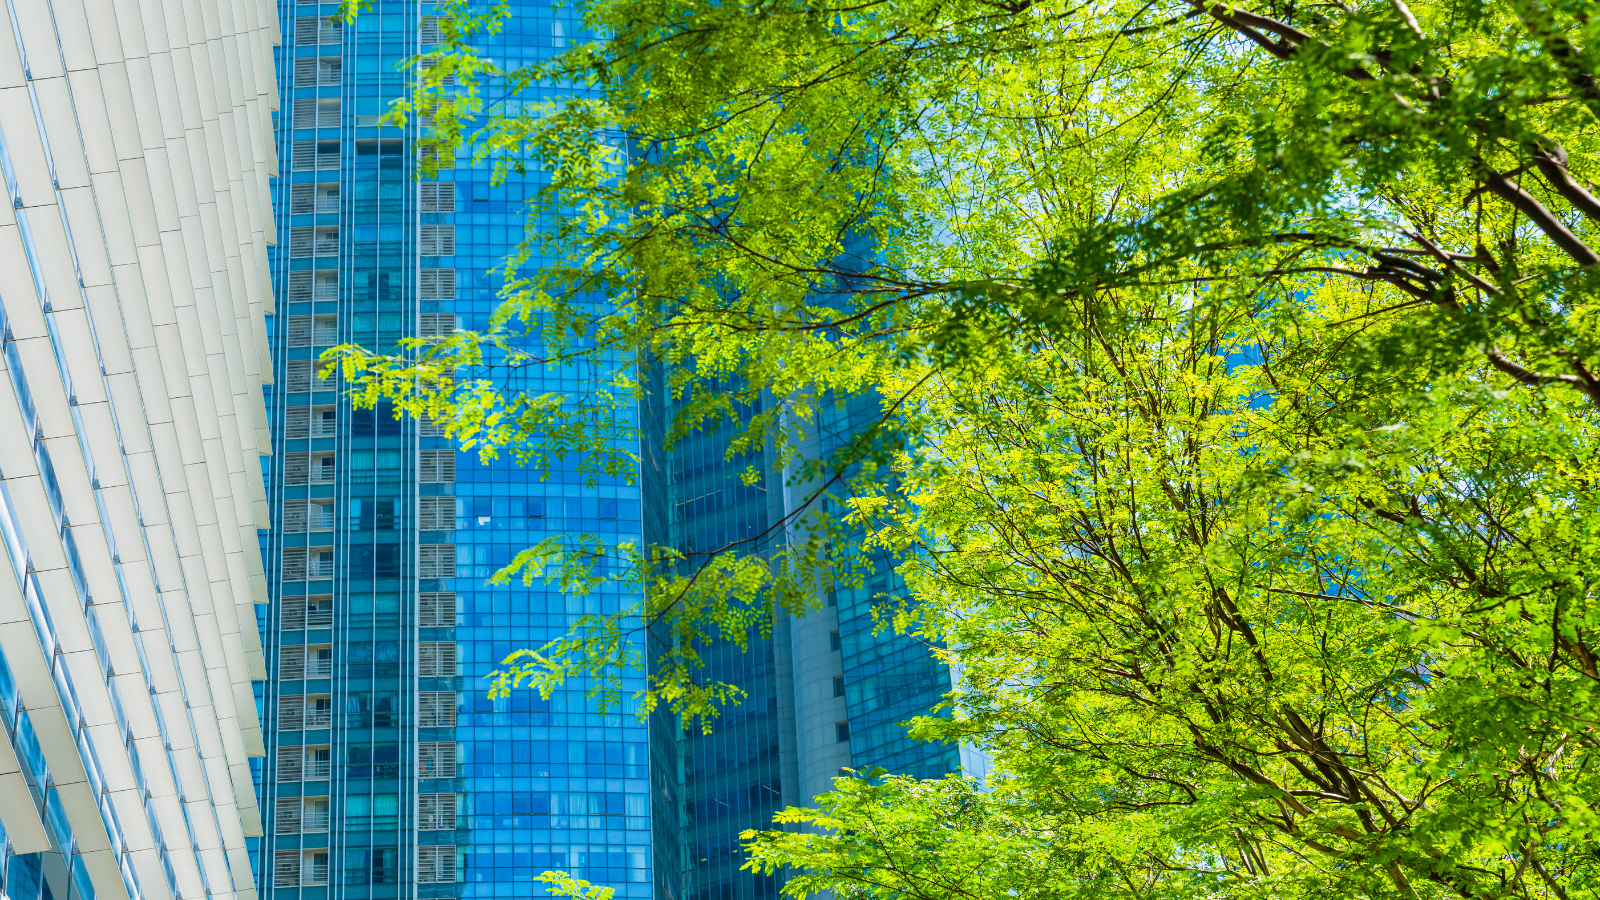 A modern glass skyscraper with leafy trees in the foreground